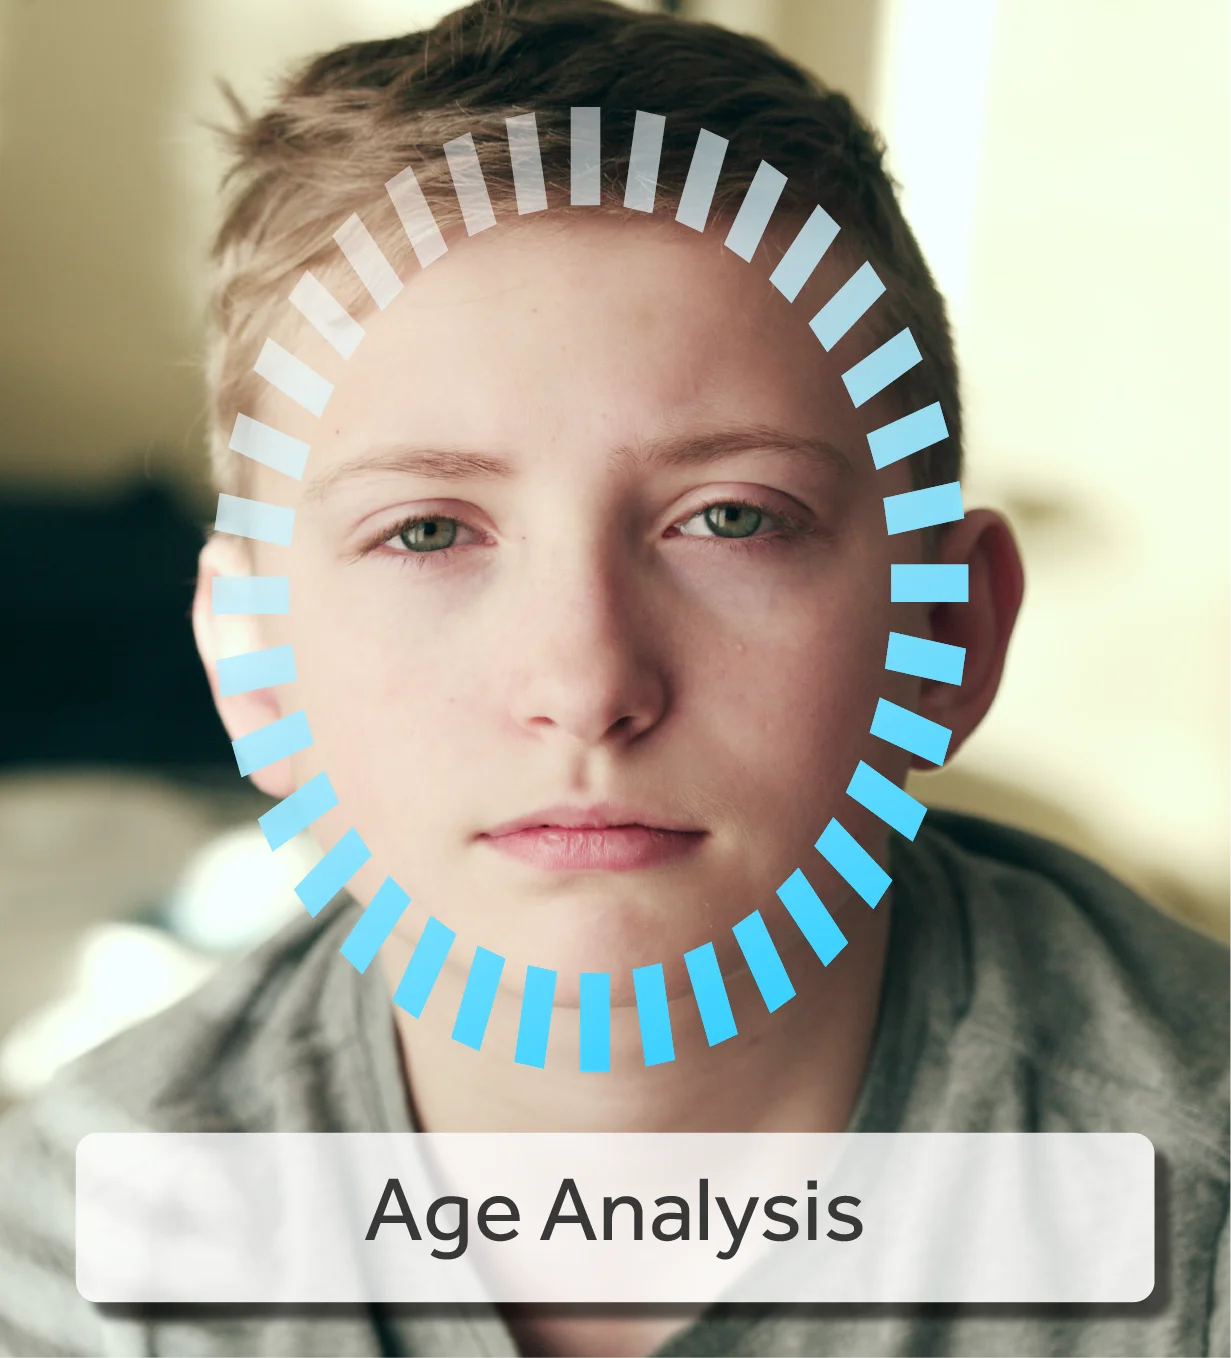 Age analysis for age verification